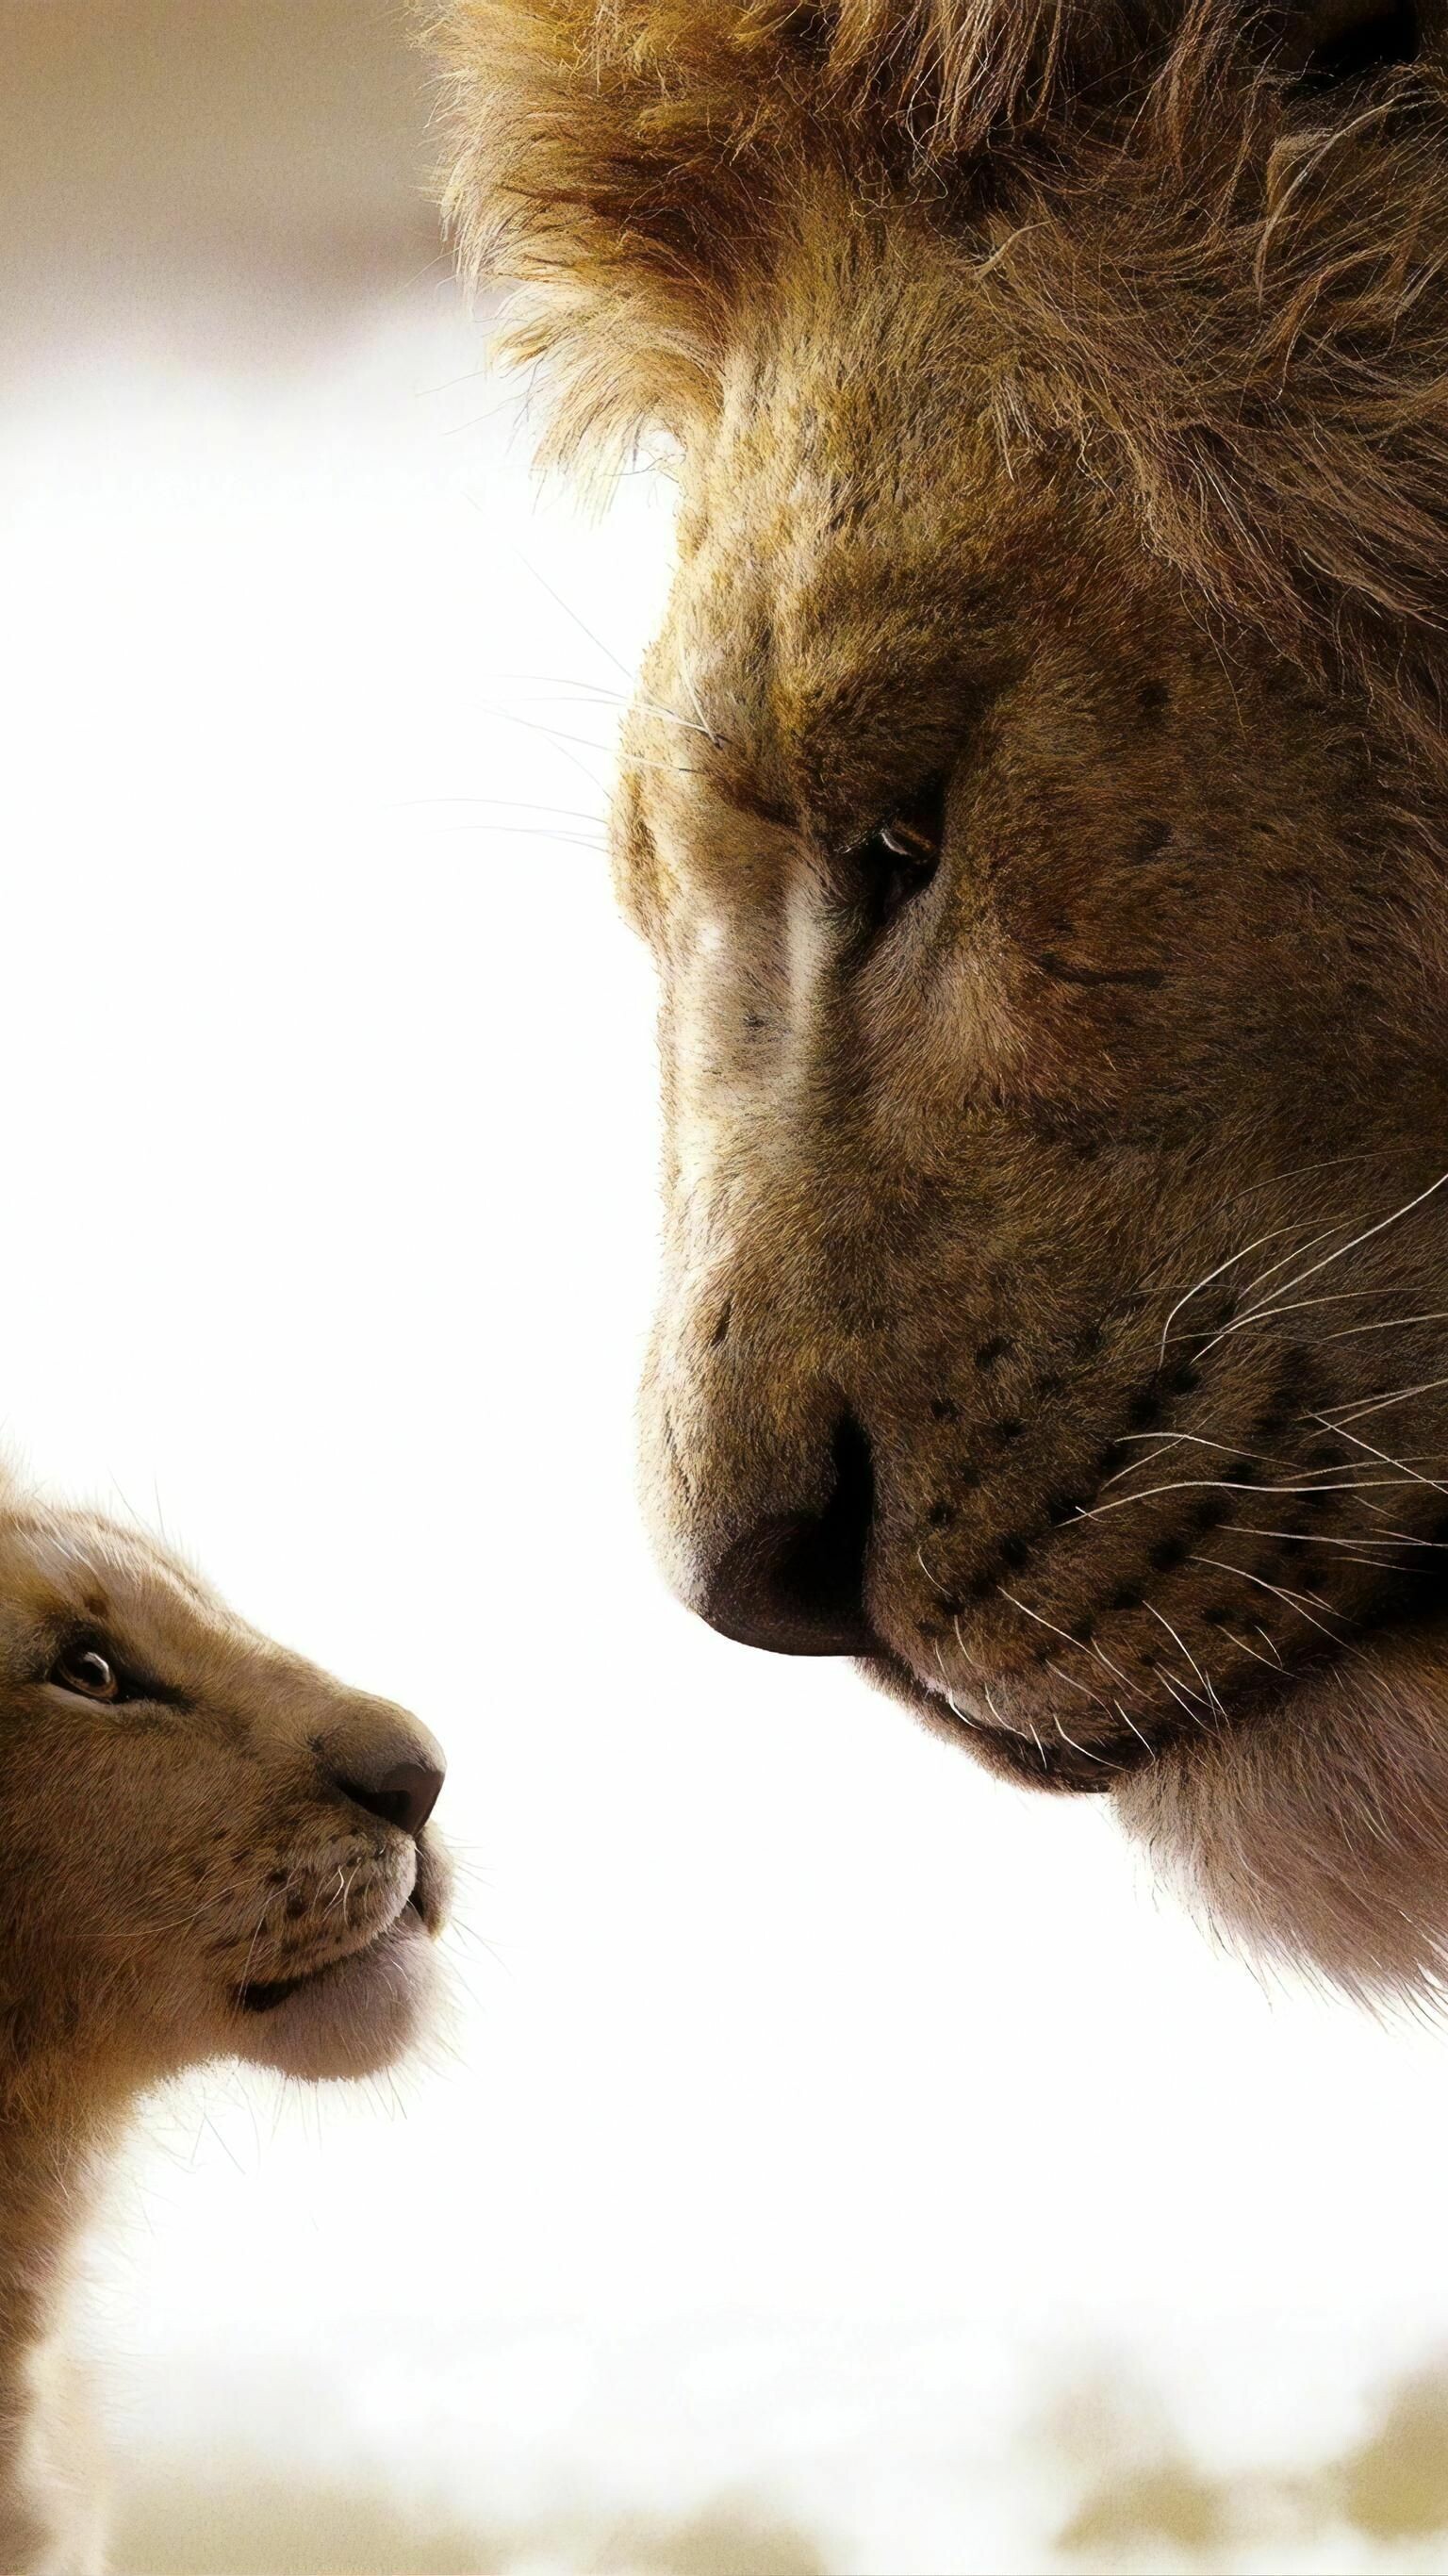 The Lion King: Mufasa and Simba, The Pride Lands. 1540x2740 HD Wallpaper.